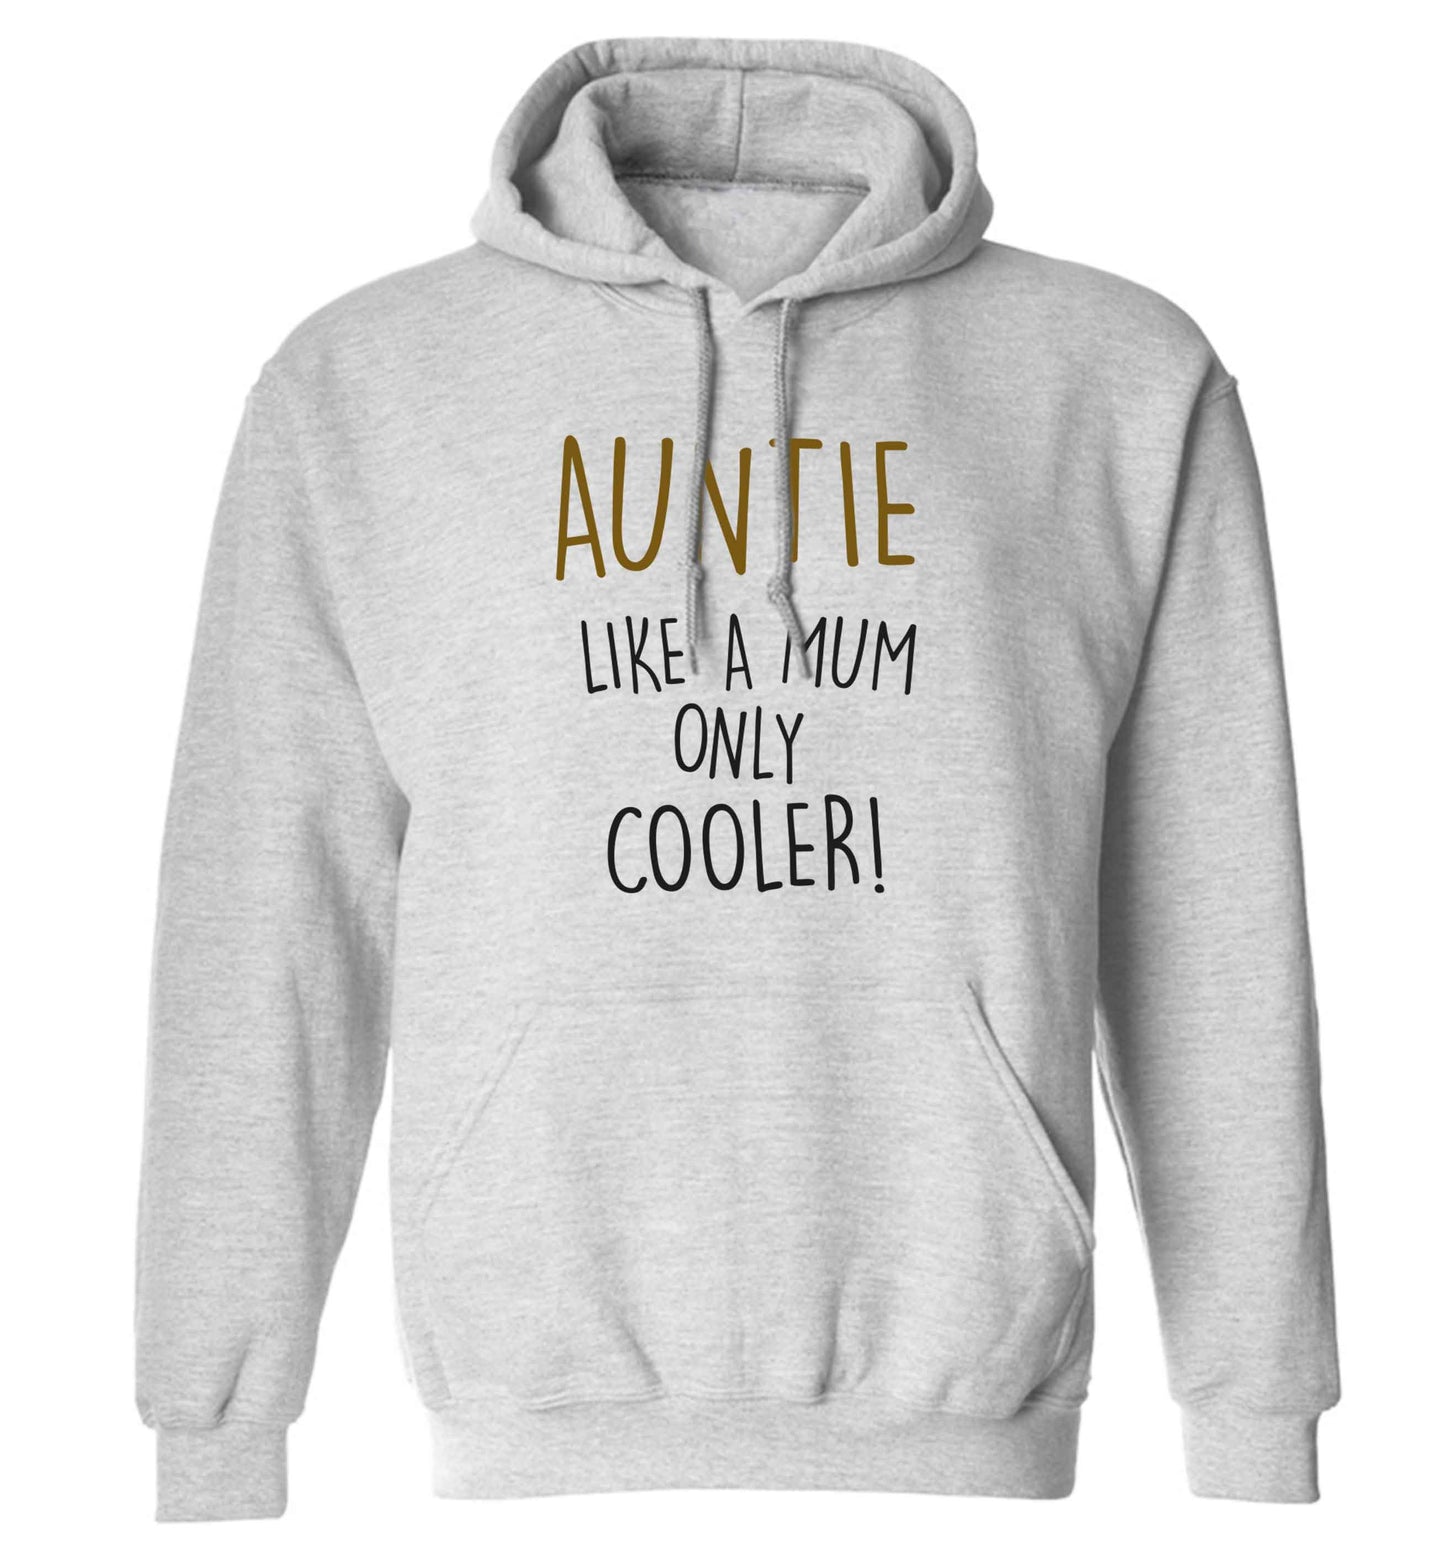 Auntie like a mum only cooler adults unisex grey hoodie 2XL